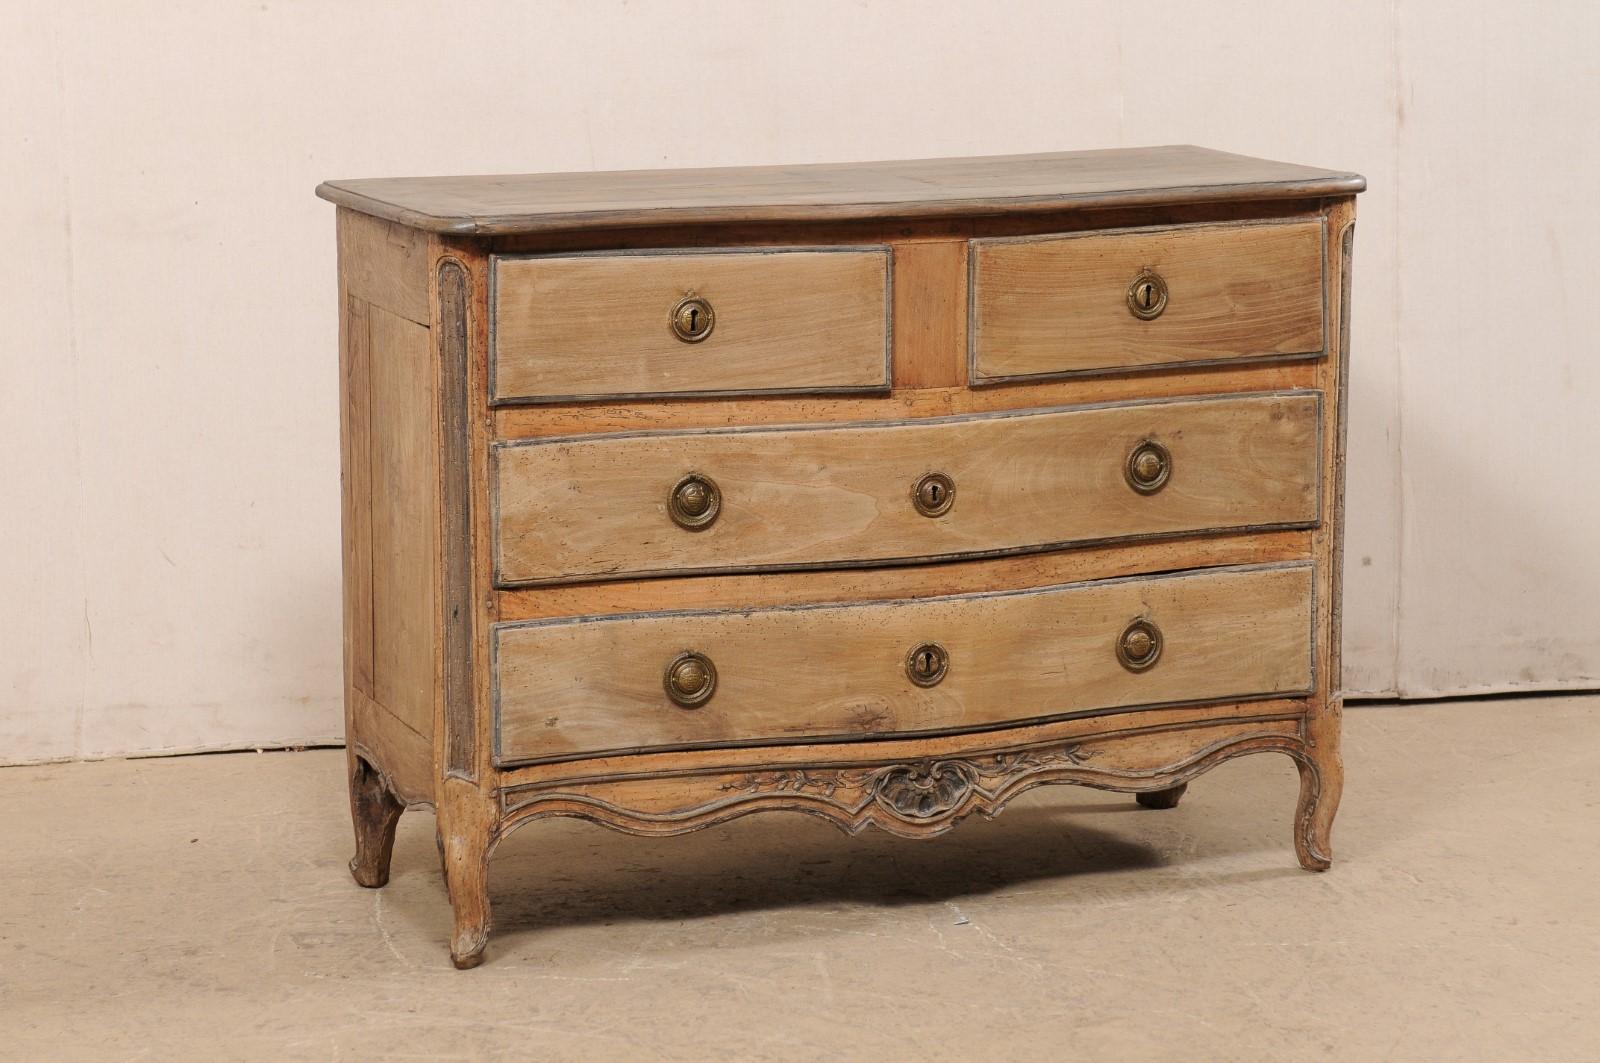 A French carved-wood serpentine commode, with slender depth, from the early 19th century. This antique chest from France has been designed with a subtle serpentine-shaped body, with skirt carved on three sides, and raised on four petitely-carved